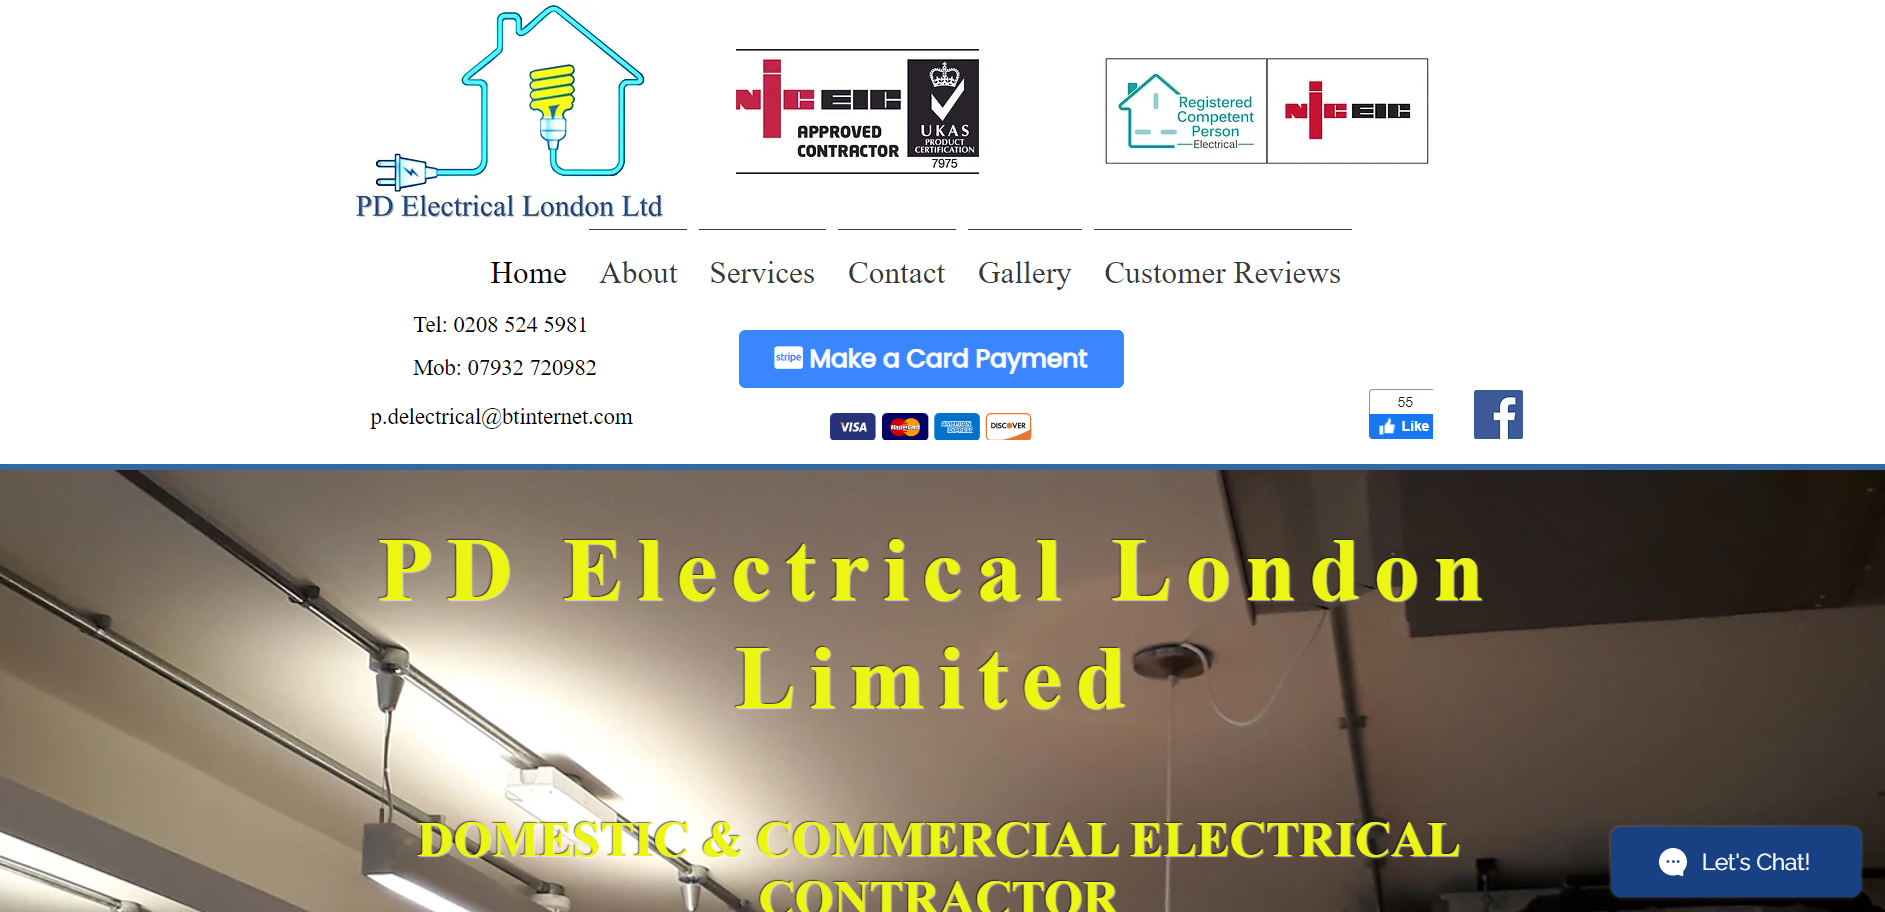 PD Electrical London Limited